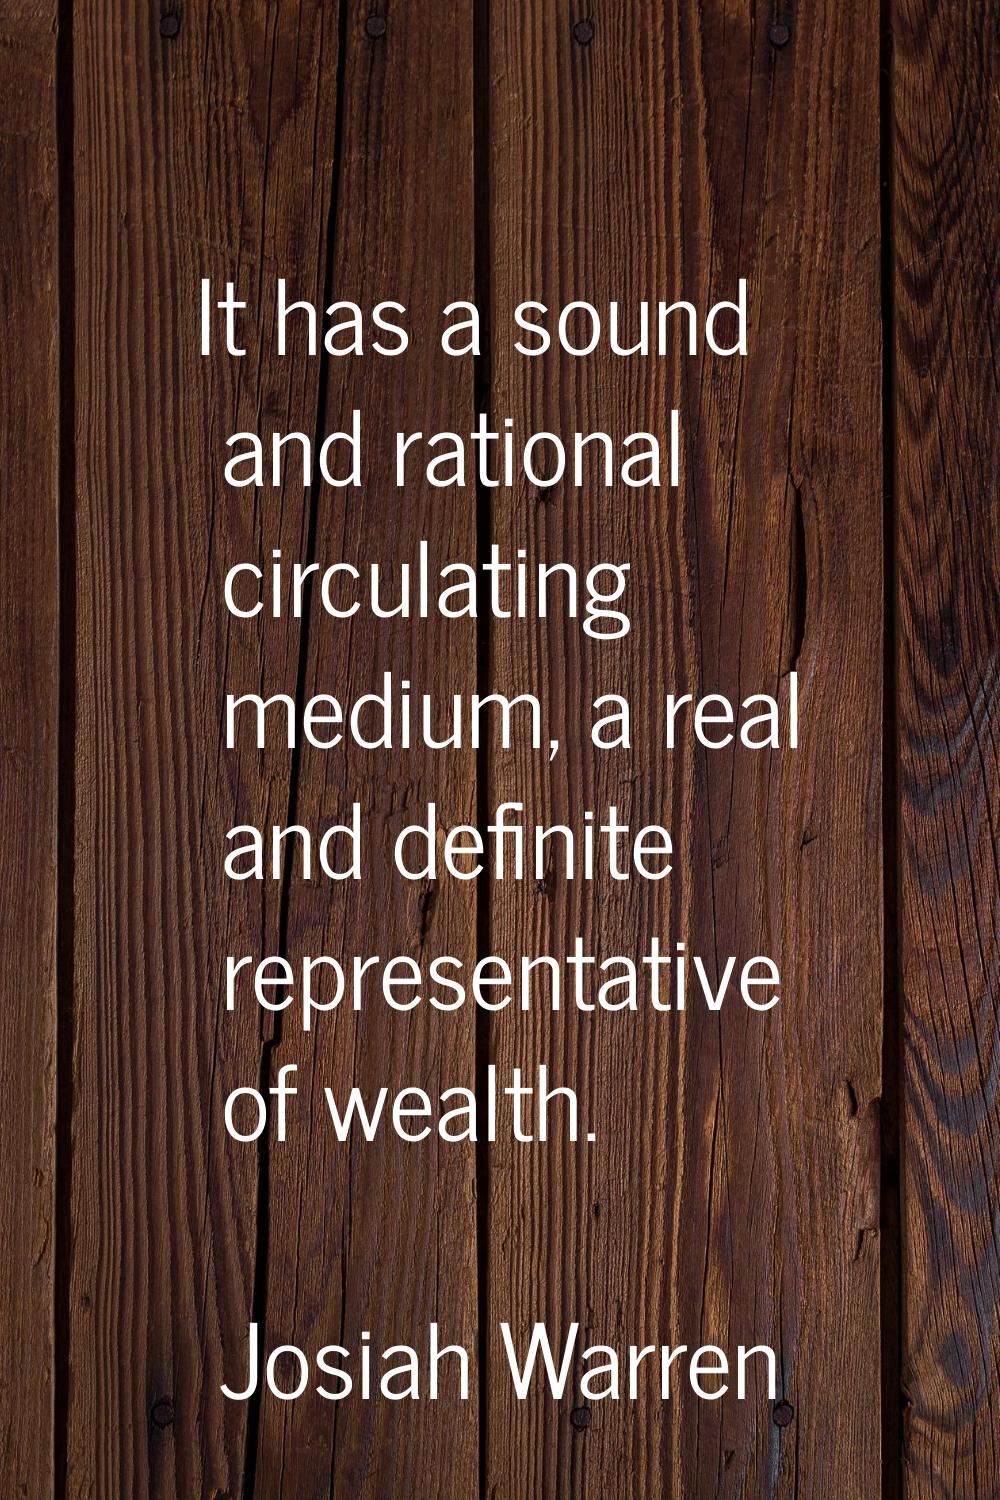 It has a sound and rational circulating medium, a real and definite representative of wealth.